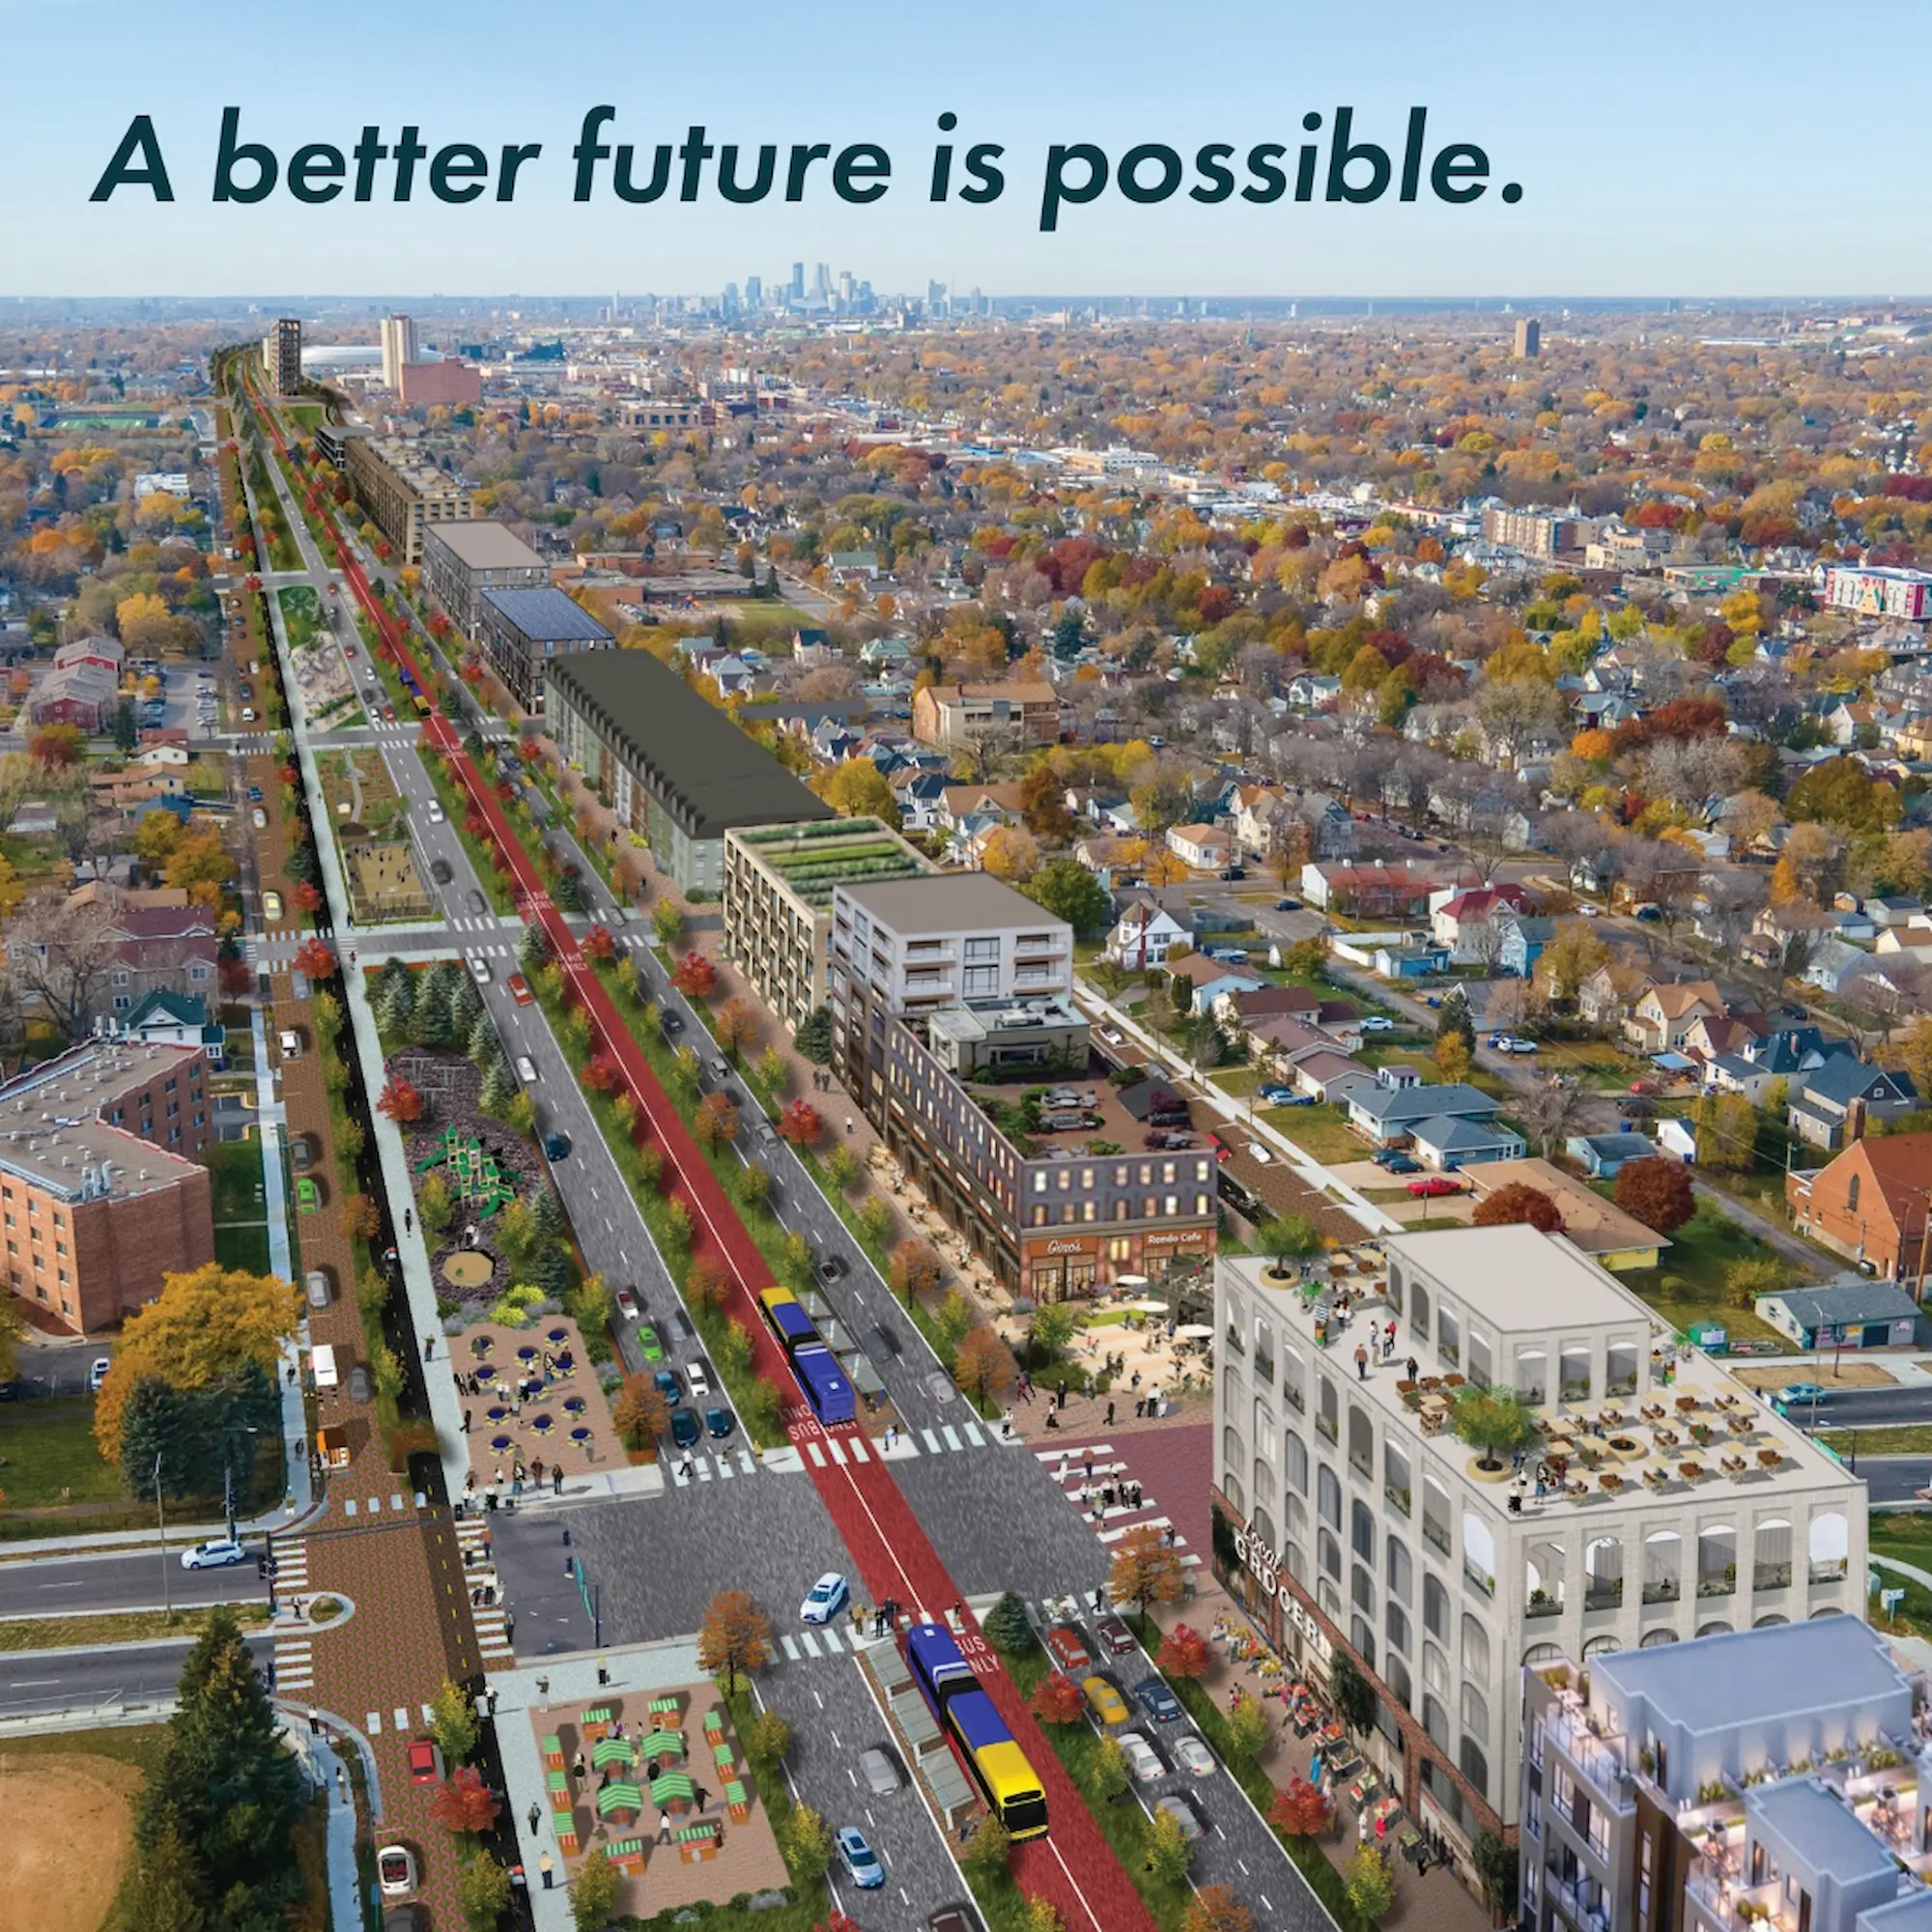 designer mock-up of potential street use in city with text that reads "a better future is possible"